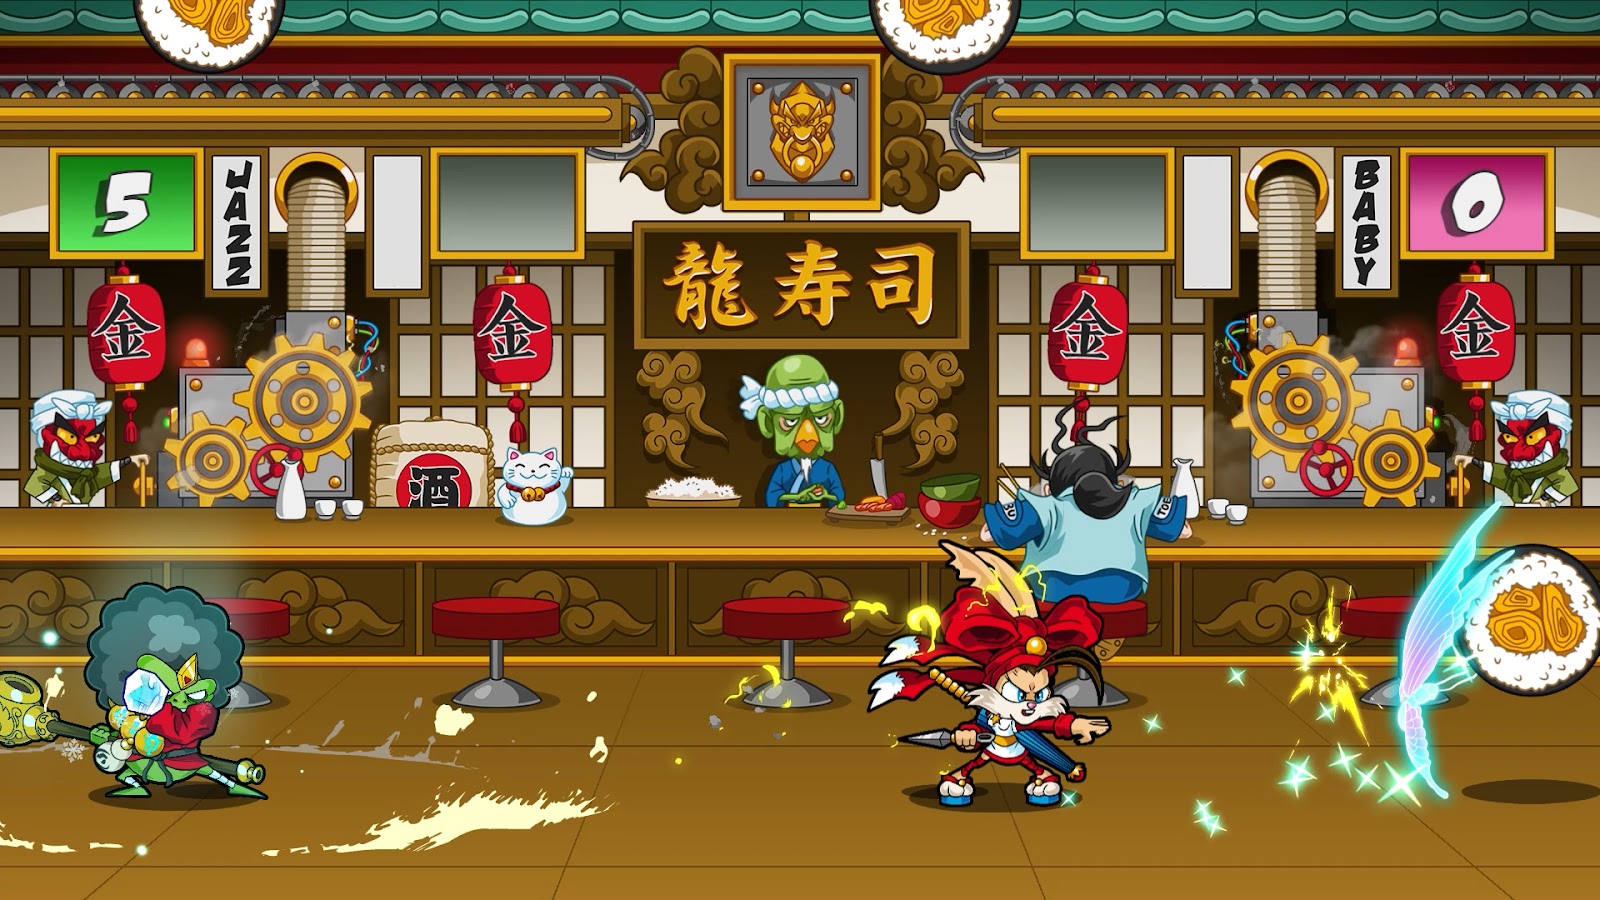 A level where the player is fighting in an oriental style world with attacks coming from both sides!